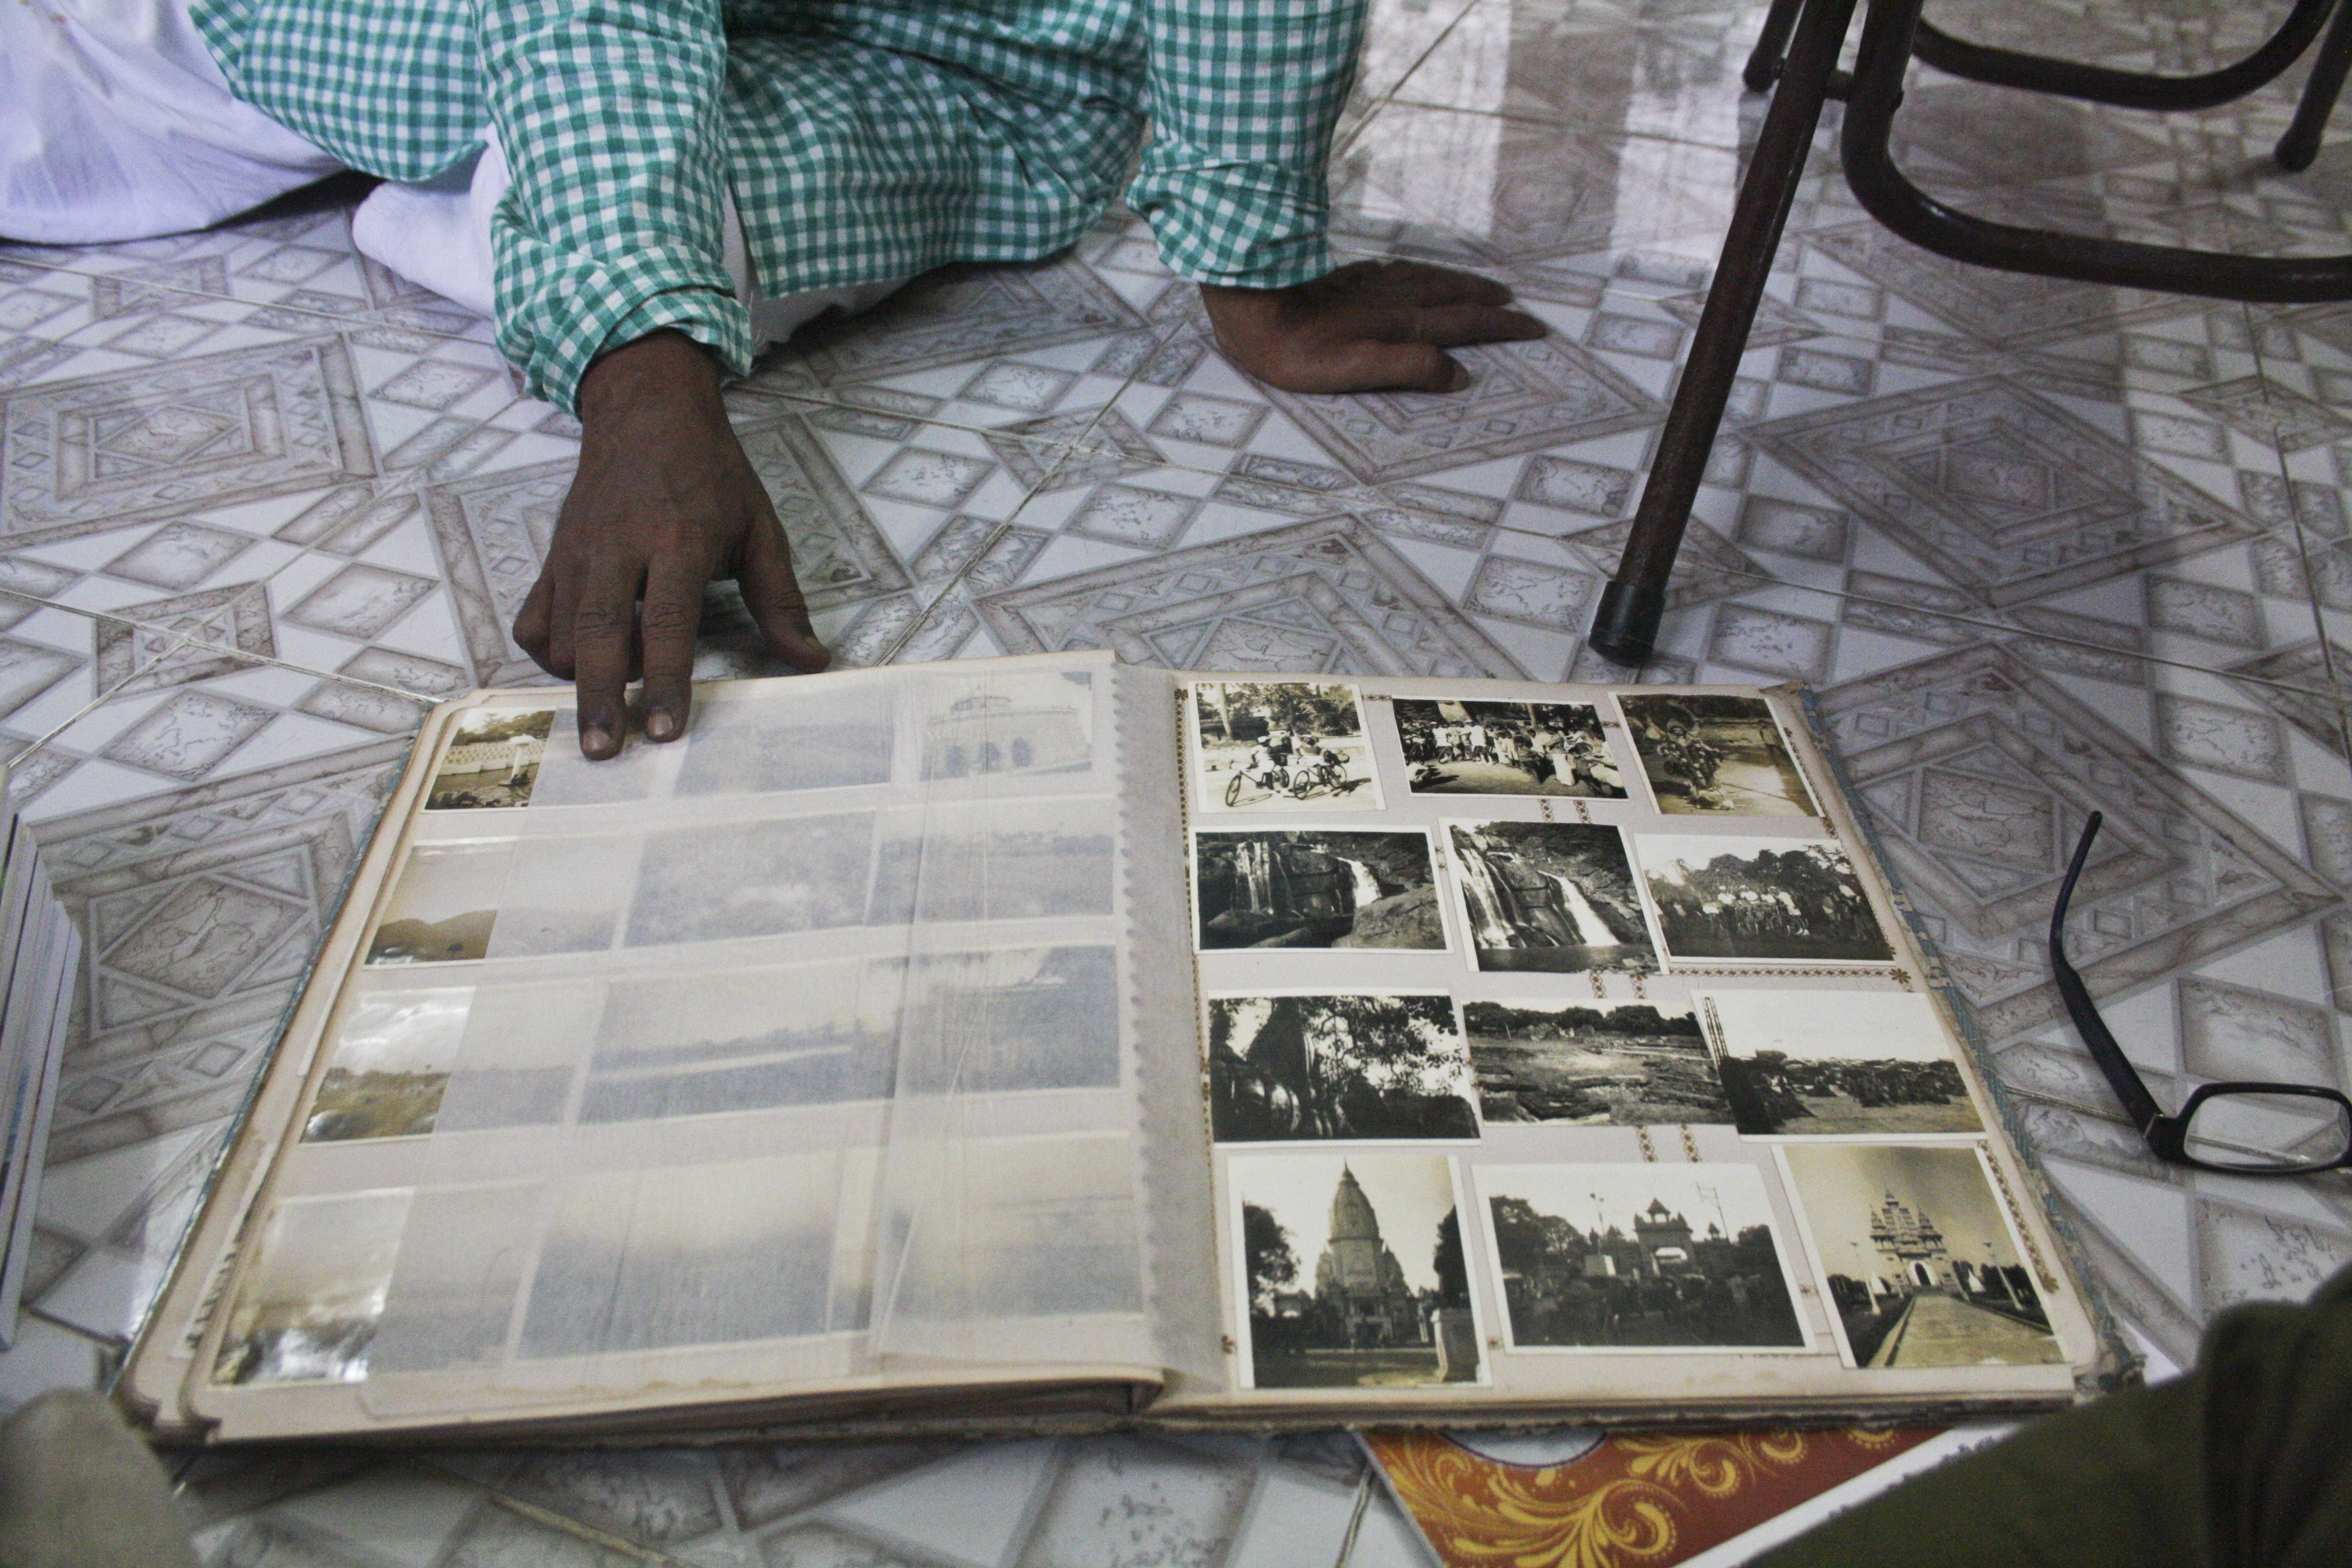 Photo album open to display images, resting on a tile floor near eyeglasses and a chair. A man's hand holds open a page. On the page are black and white photos of scenes of people, buildings and waterfalls.